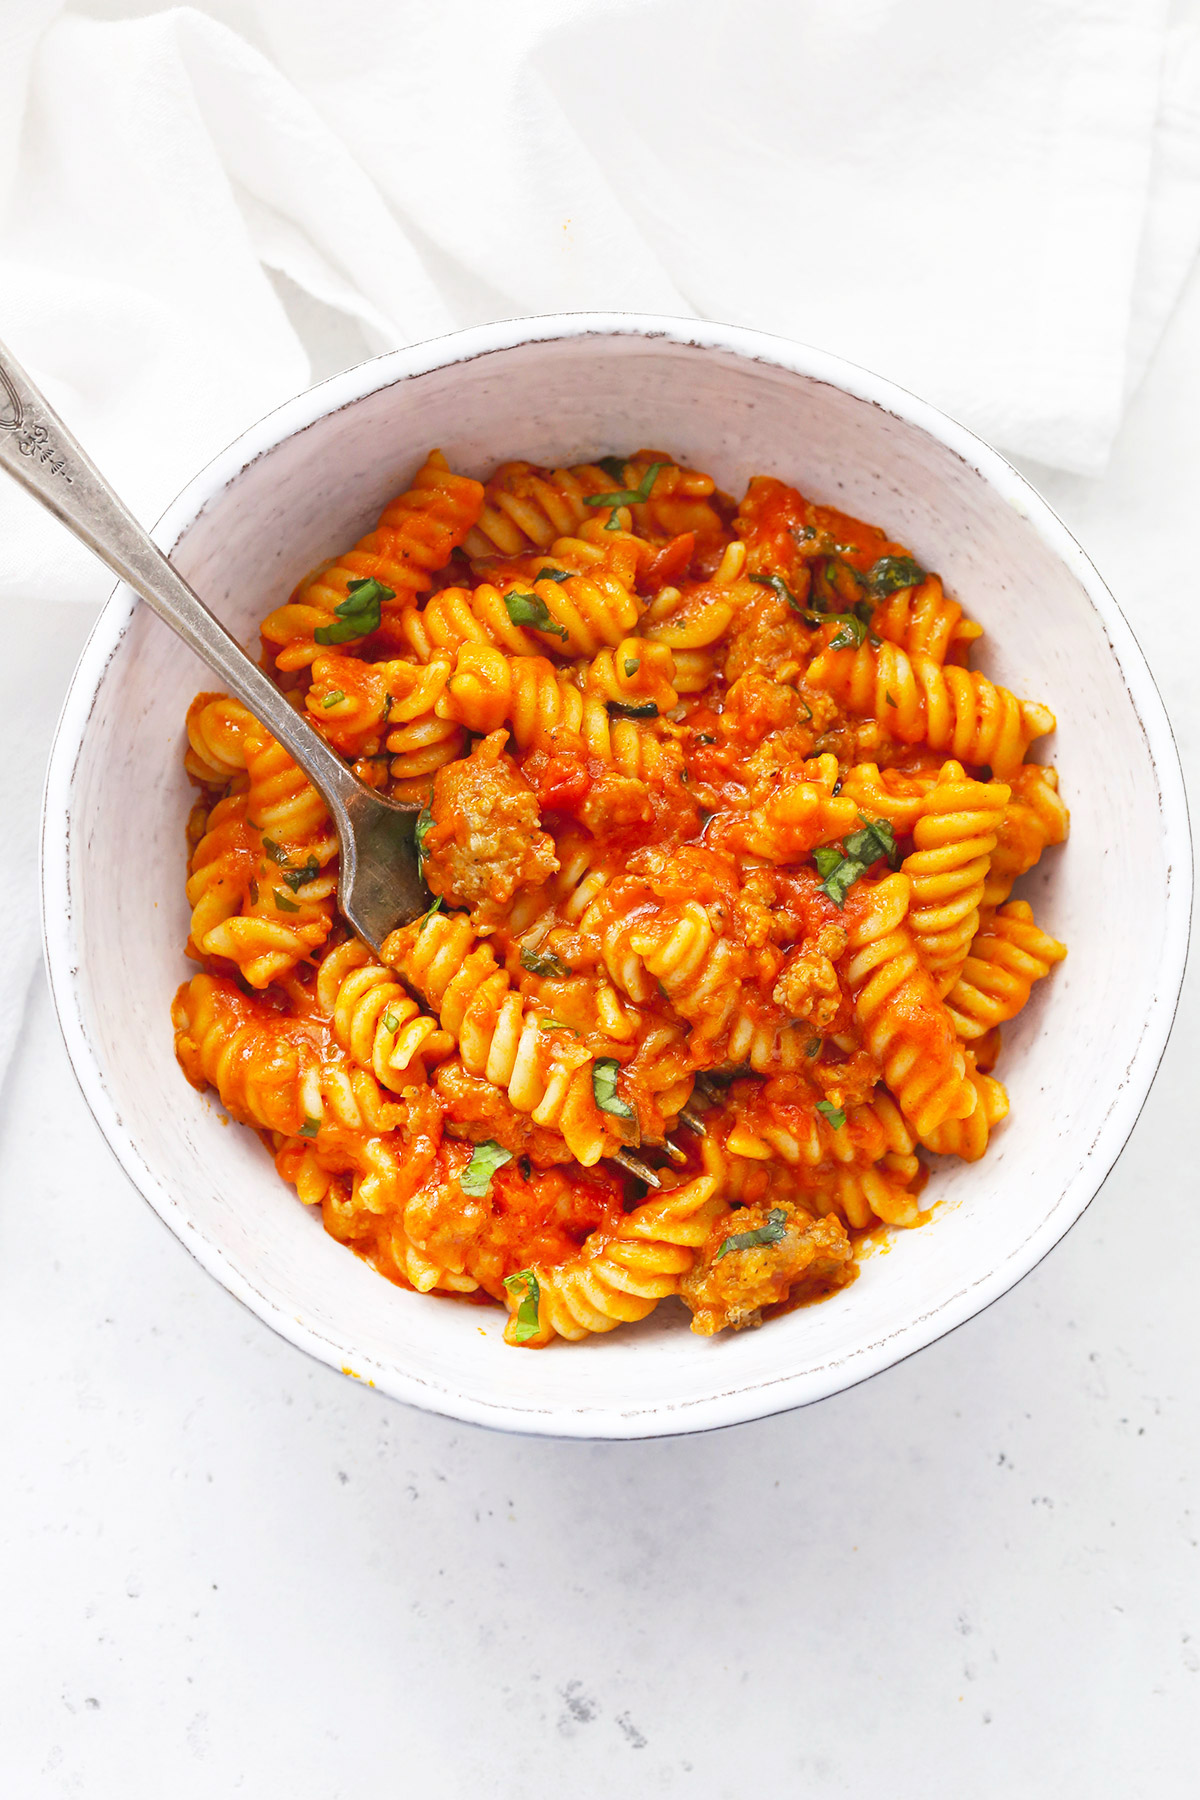 Instant Pot Gluten Free Pasta with Marinara Sauce and Sausage from One Lovely Life